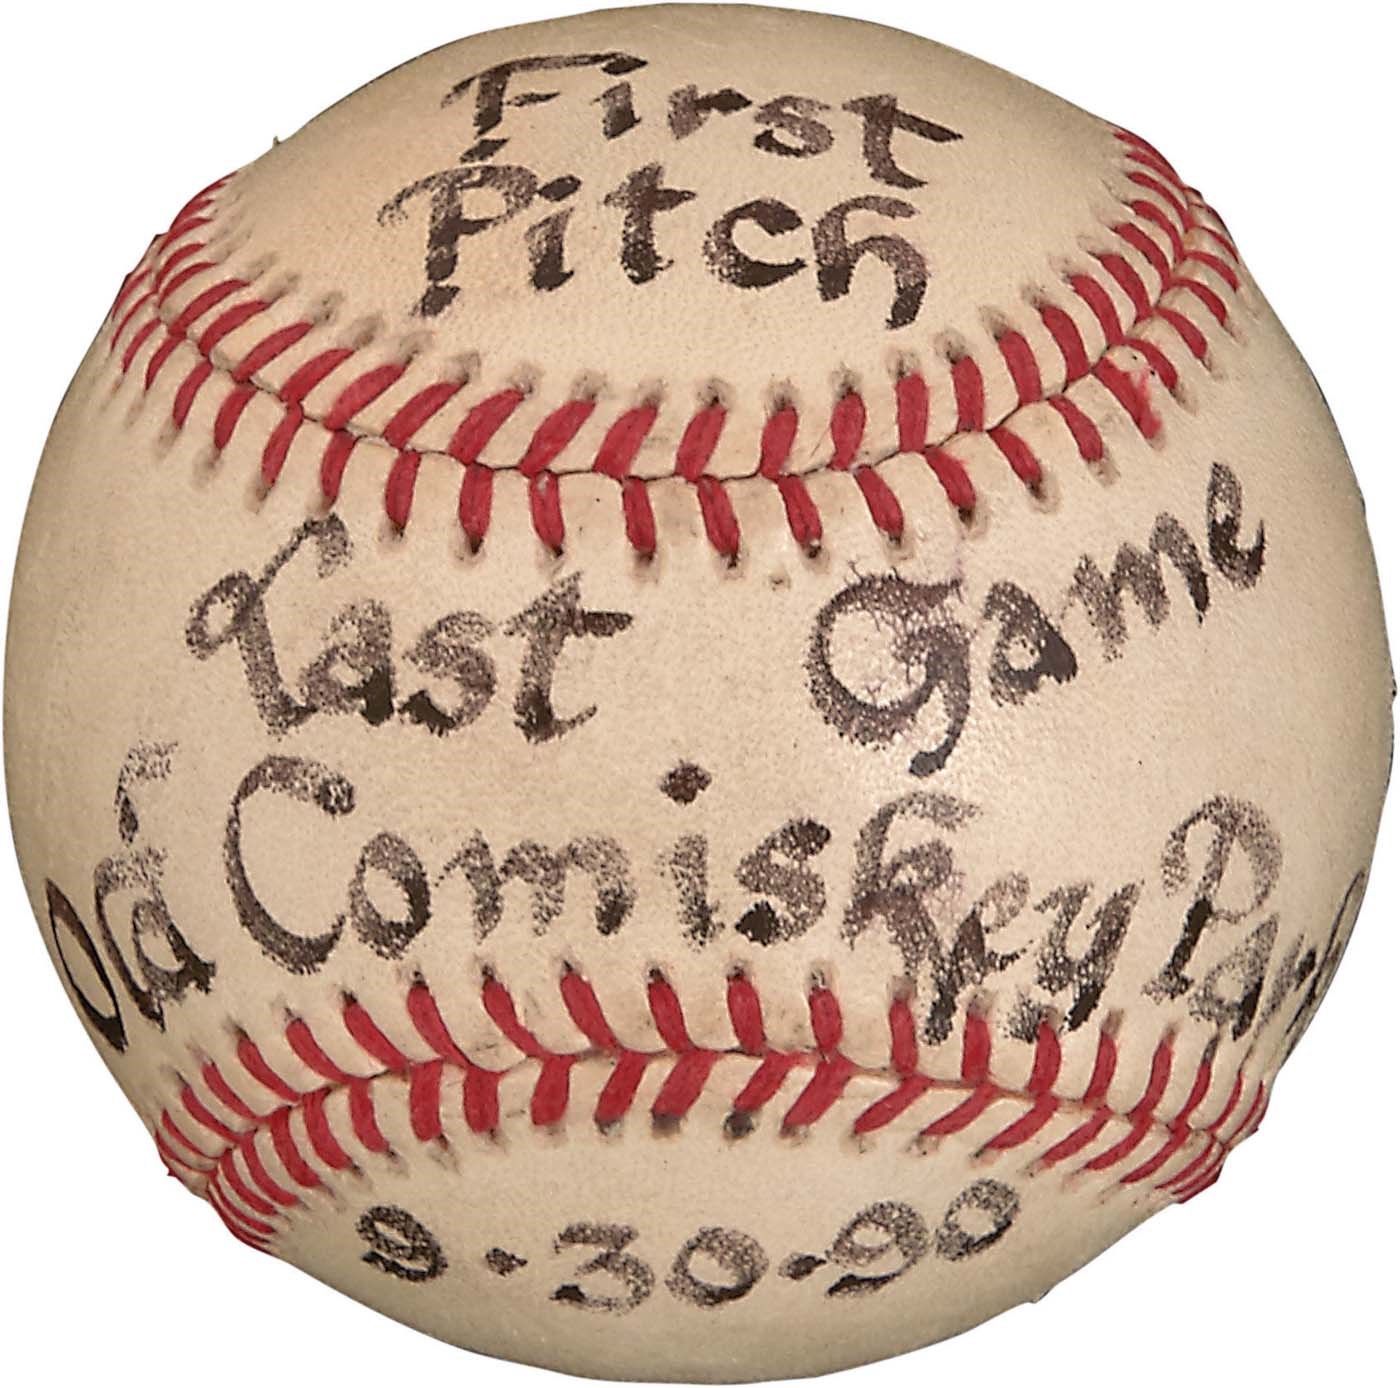 First Pitch Ball from the Last Game at Old Comiskey Park (Comiskey Family Sourced)